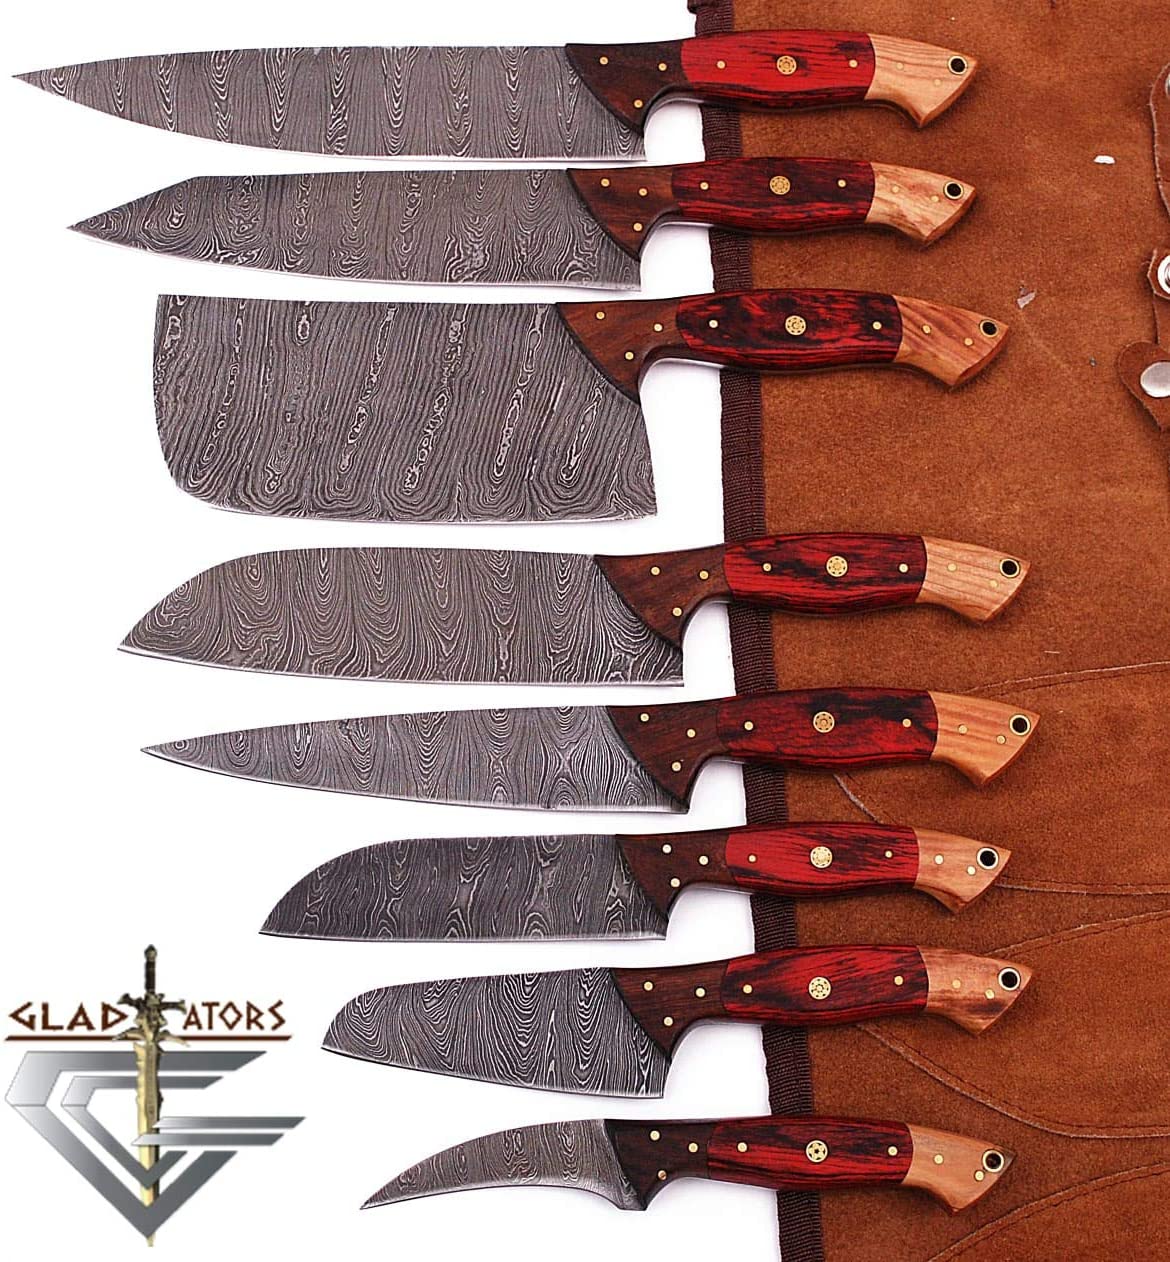 G29RD- Professional Kitchen Knives Custom Made Damascus Steel 8 pcs of Professional Utility Chef Kitchen Knife Set with Chopper / Cleaver with…